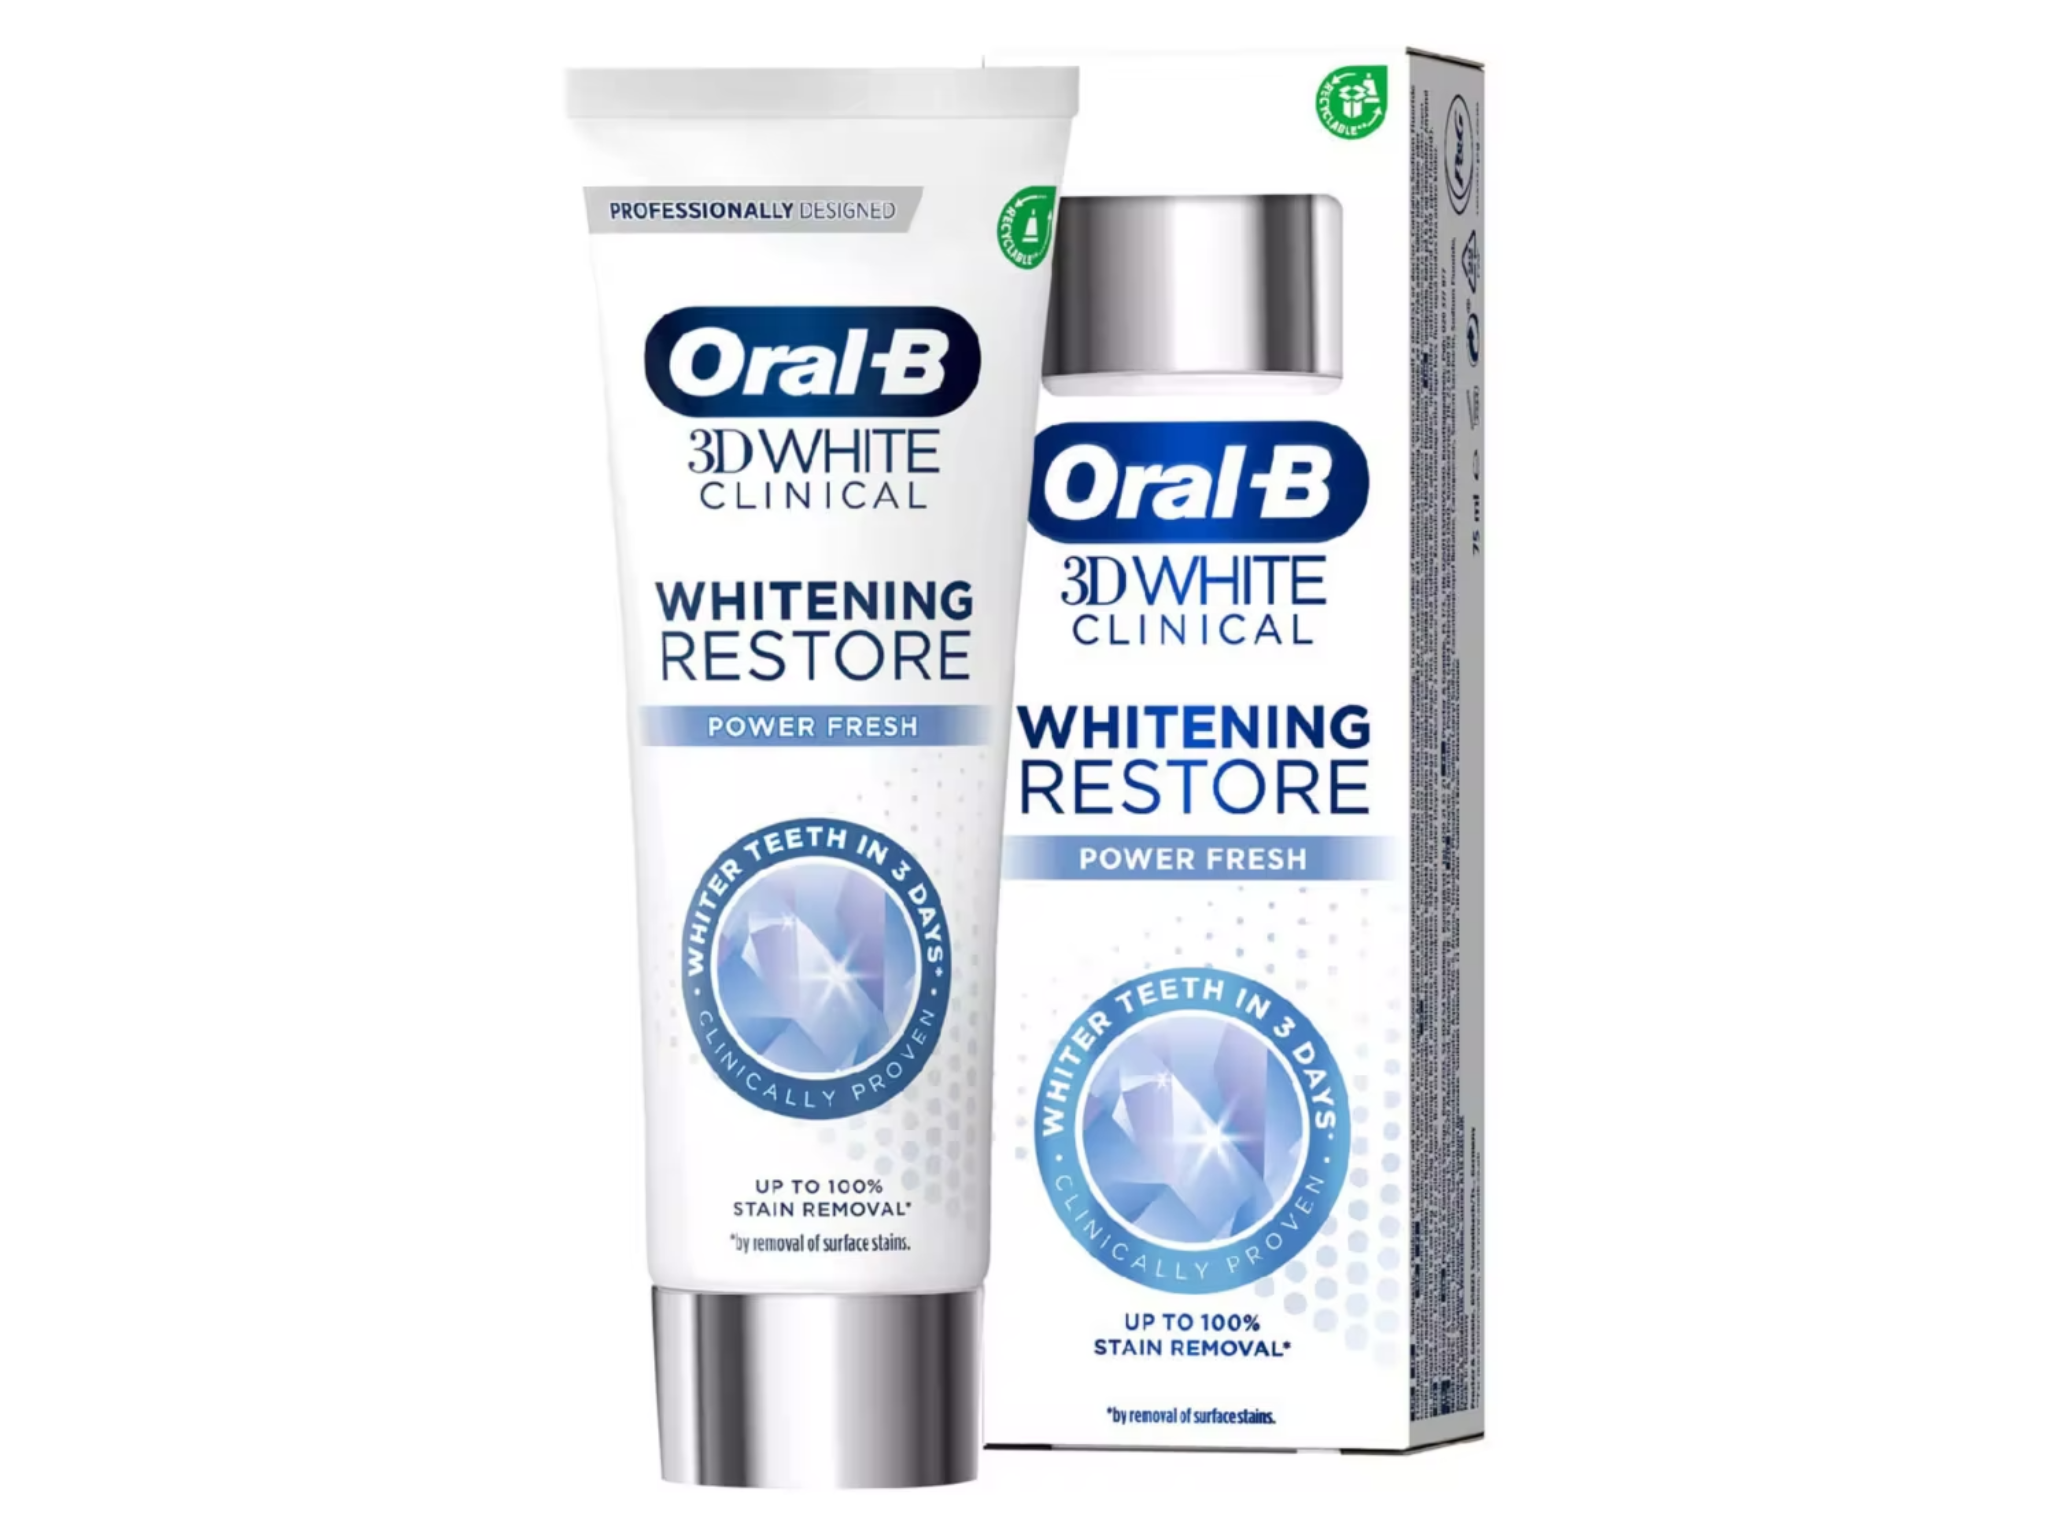 Oral-B 3d white clinical whitening restore power fresh toothpaste indybest 